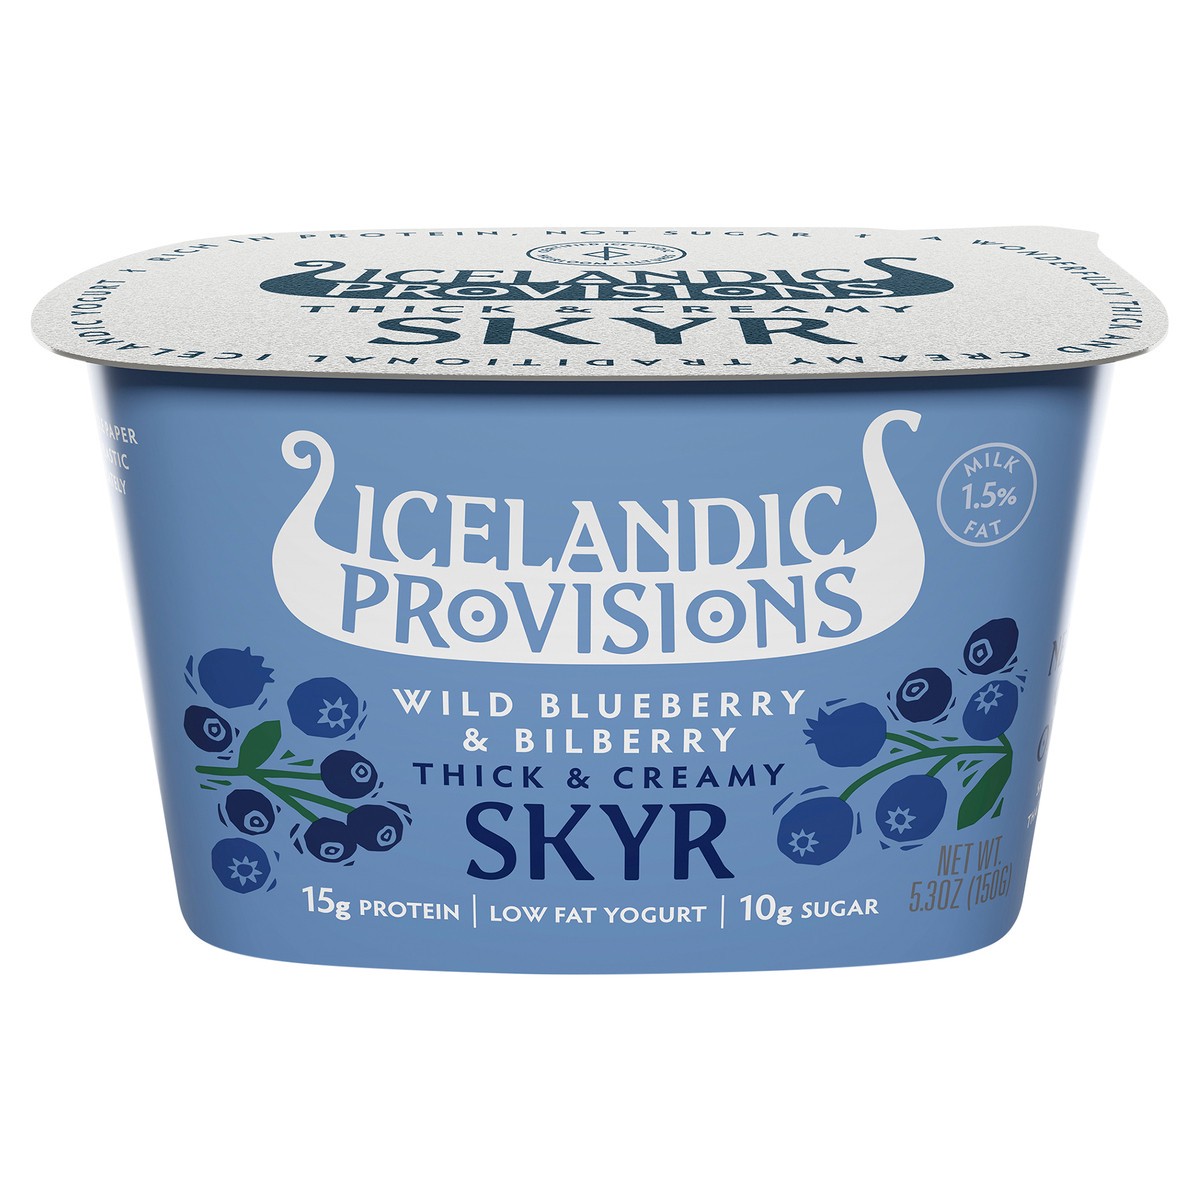 slide 1 of 4, Icelandic Provisions Wild Blueberry & Bilberry Thick & Creamy Low Fat Skyr, 5.3 oz